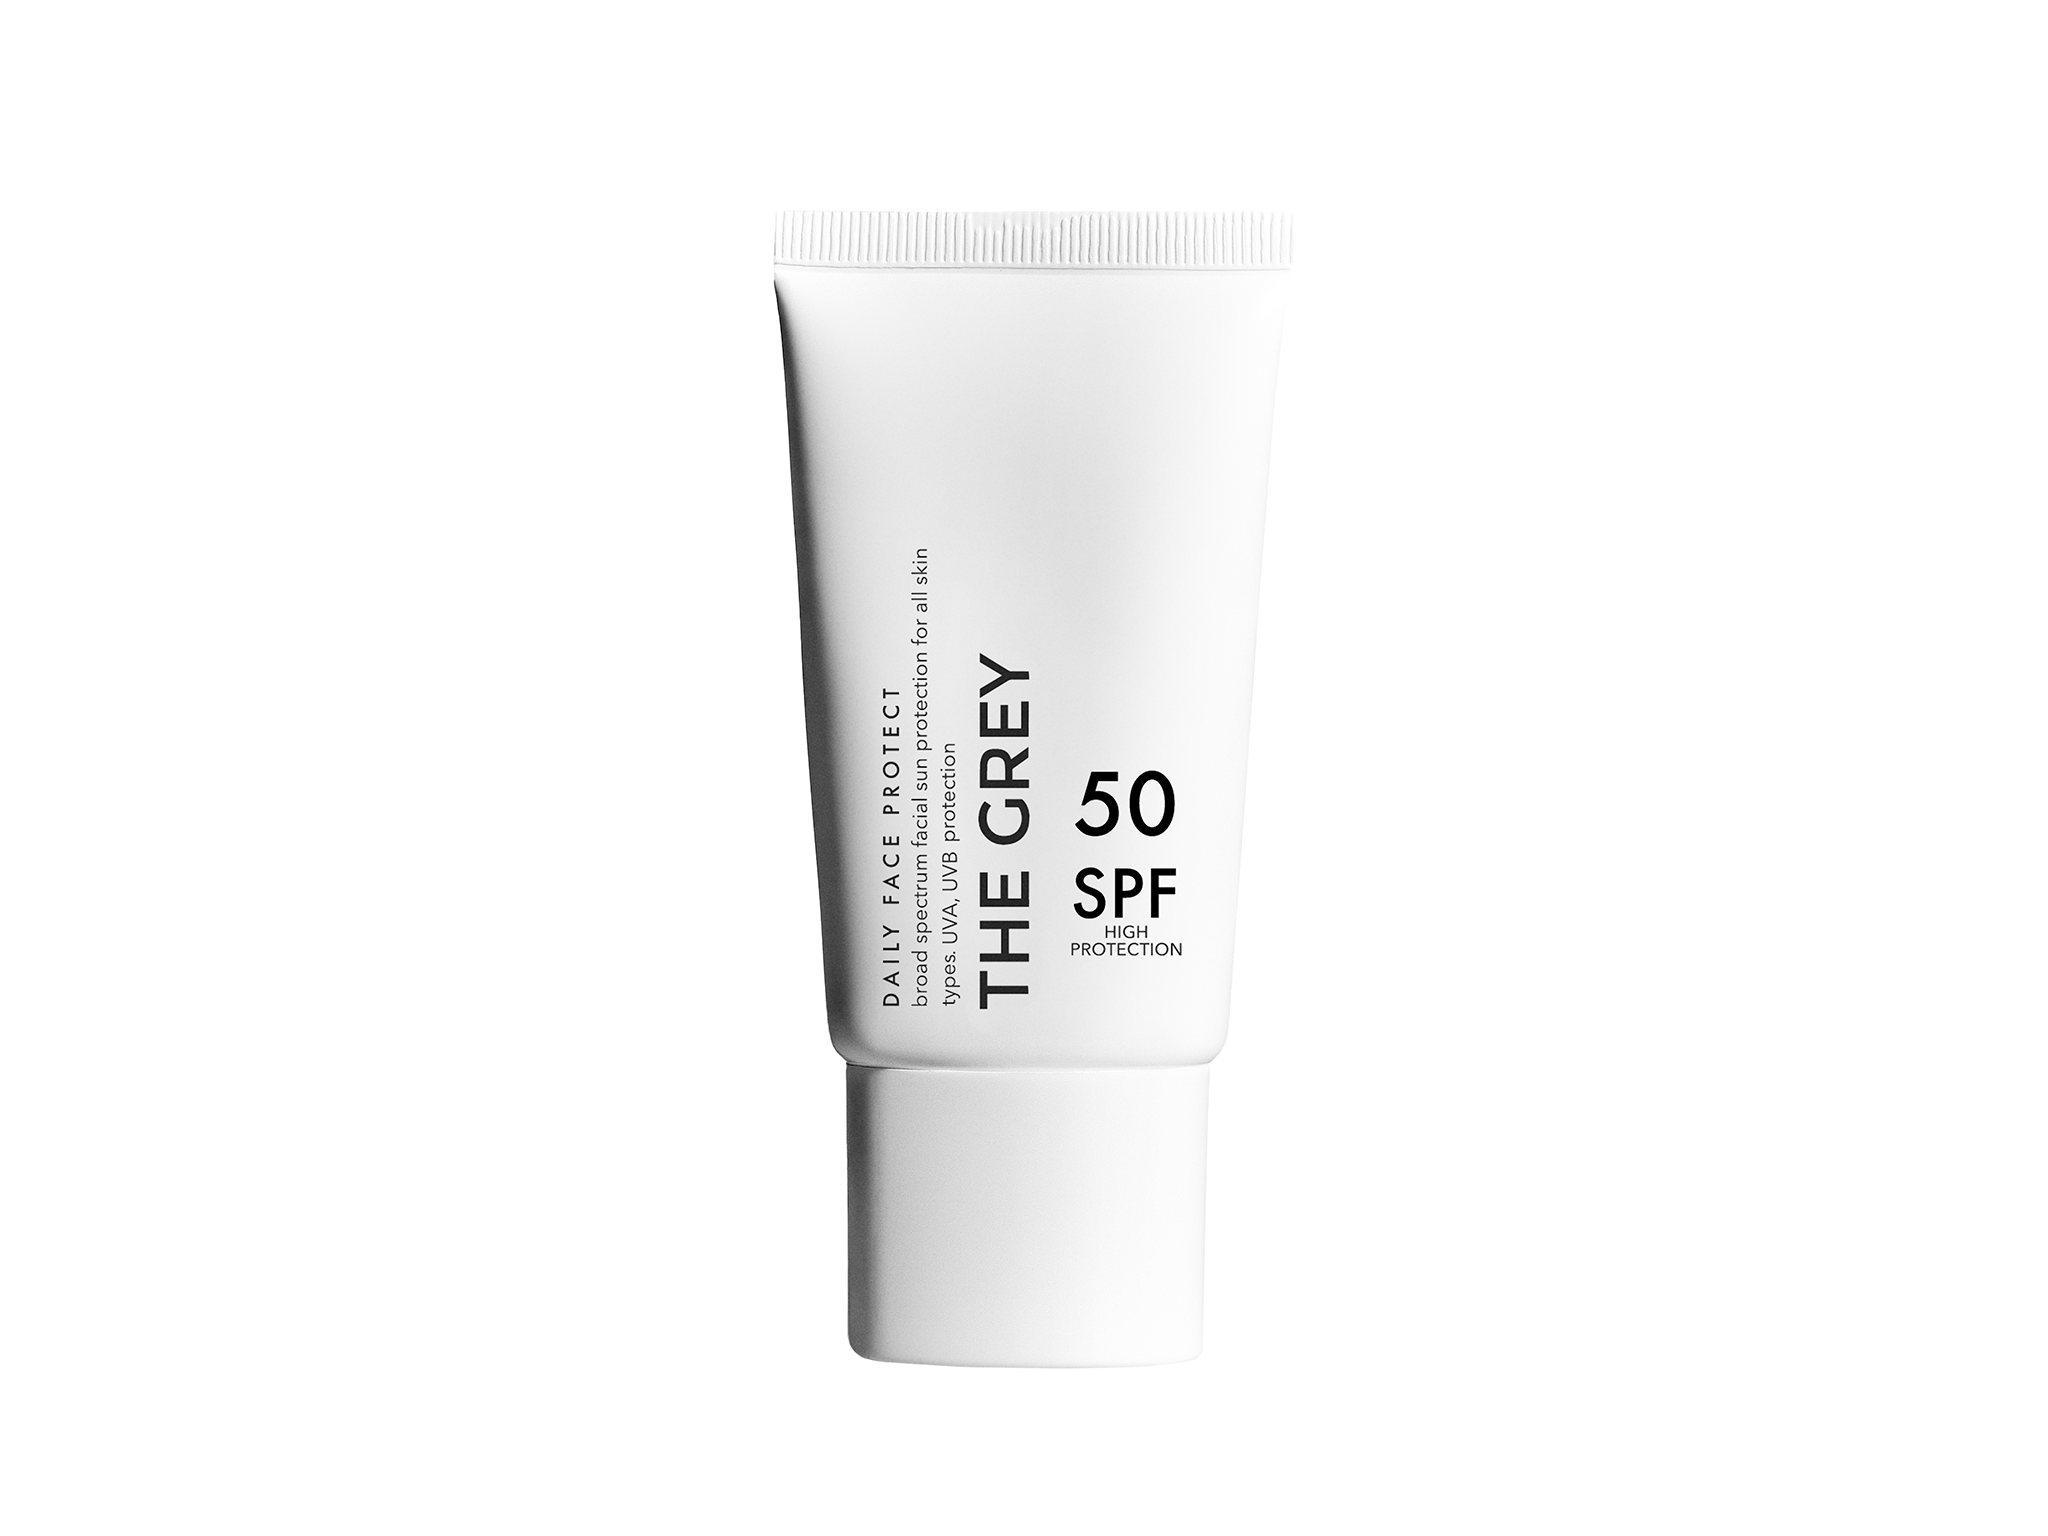 https://static.independent.co.uk/2023/05/30/11/The%20Grey%20daily%20face%20protect%20SPF50.png